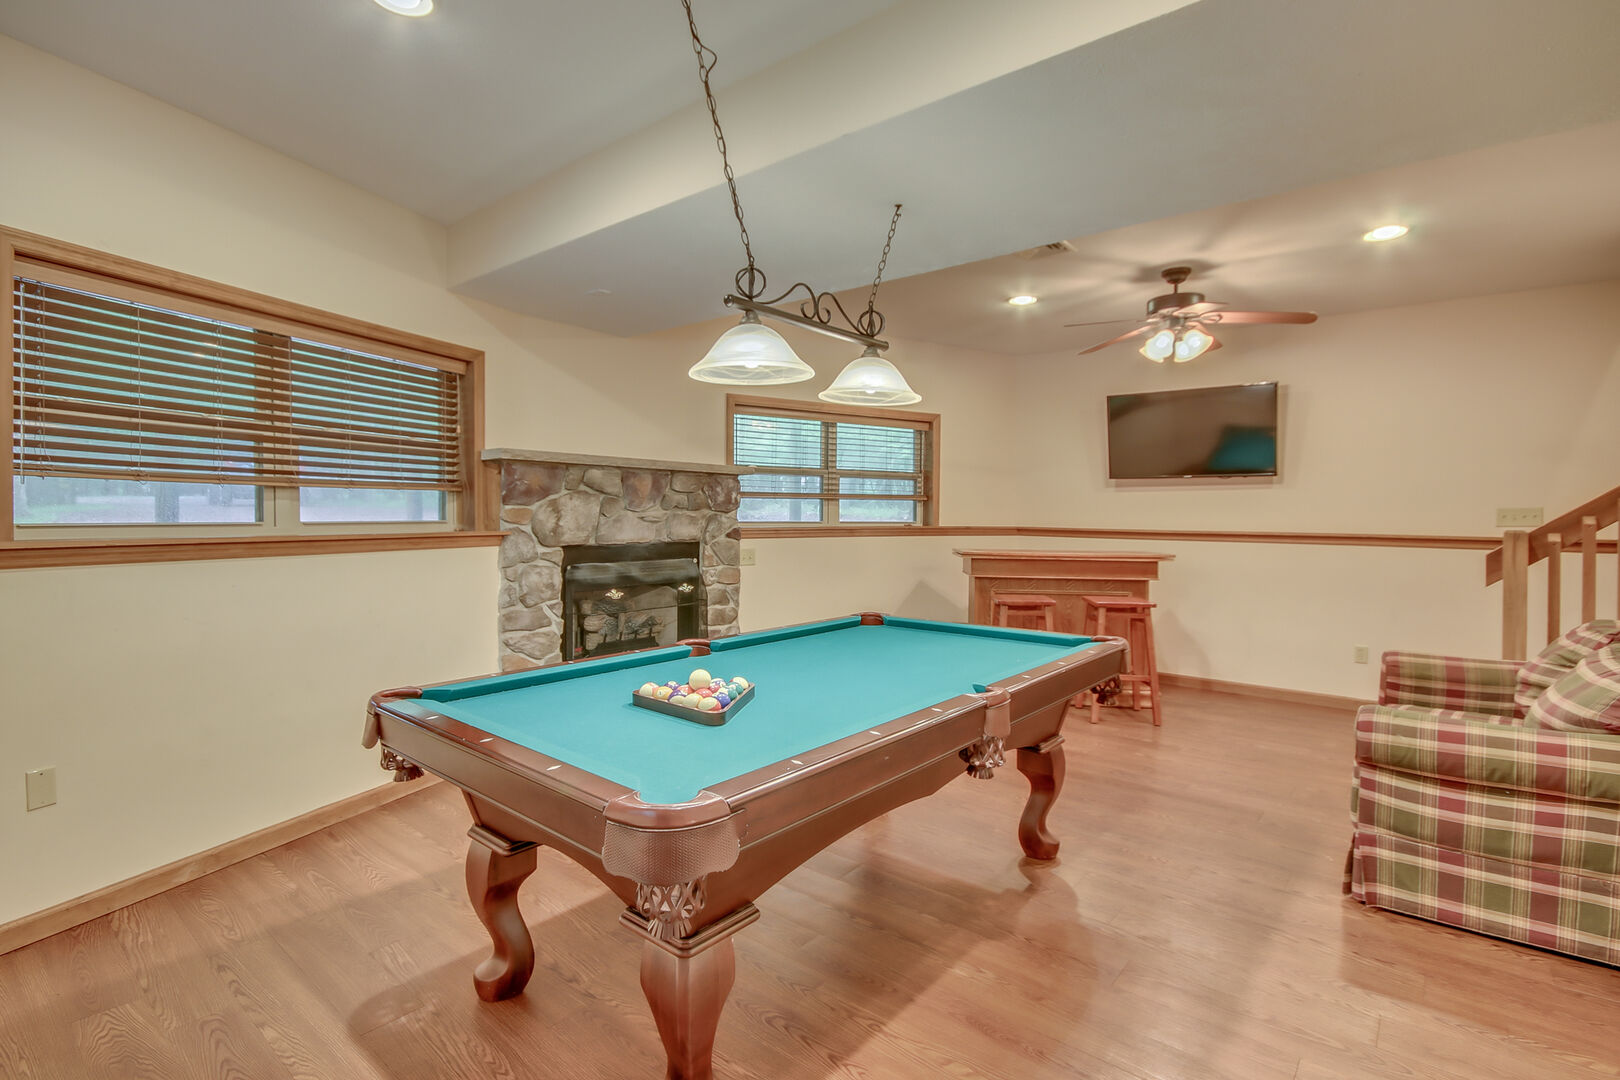 A Pool Table and Fireplace in the Game Room of Our Vacation Rental in the Poconos by Lake.